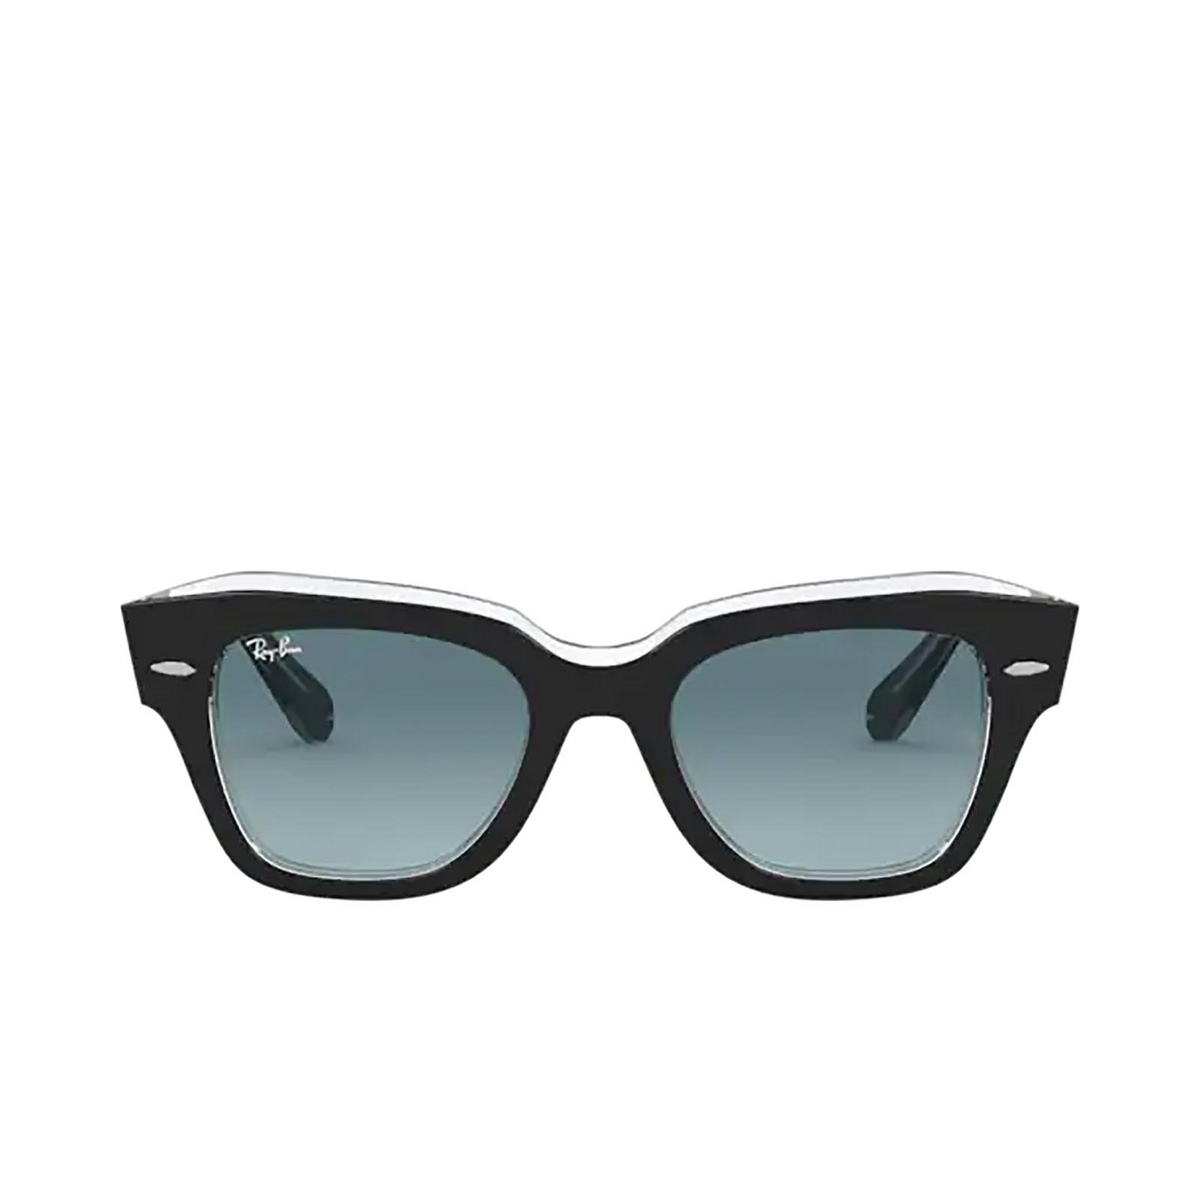 Ray-Ban STATE STREET Sunglasses 12943M BLACK ON TRANSPARENT - front view